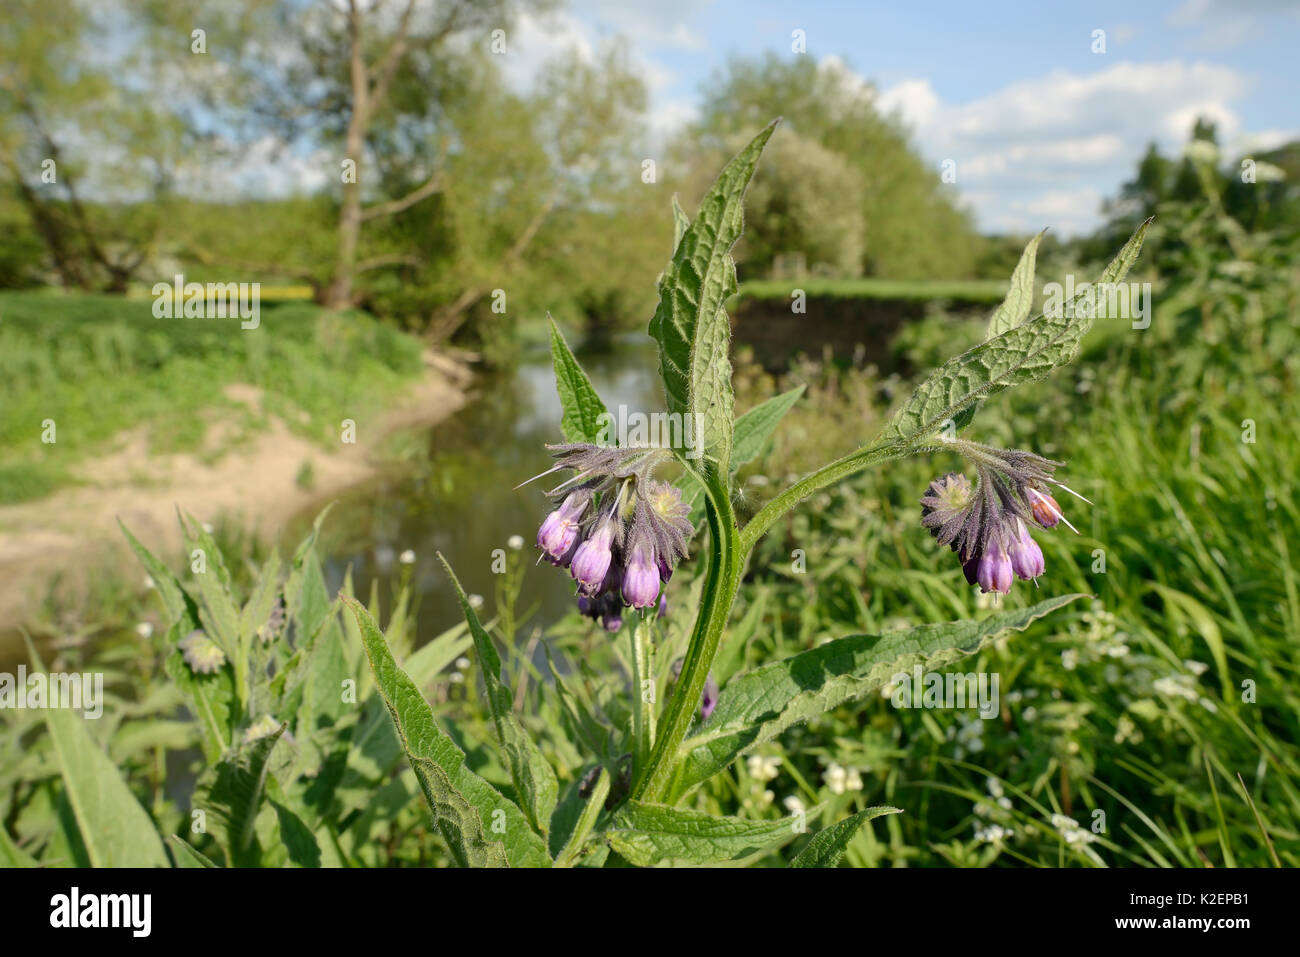 Common comfrey (Symphytum officinale) flowering on the banks of the River Avon, Lacock, Wiltshire, UK, May. Stock Photo